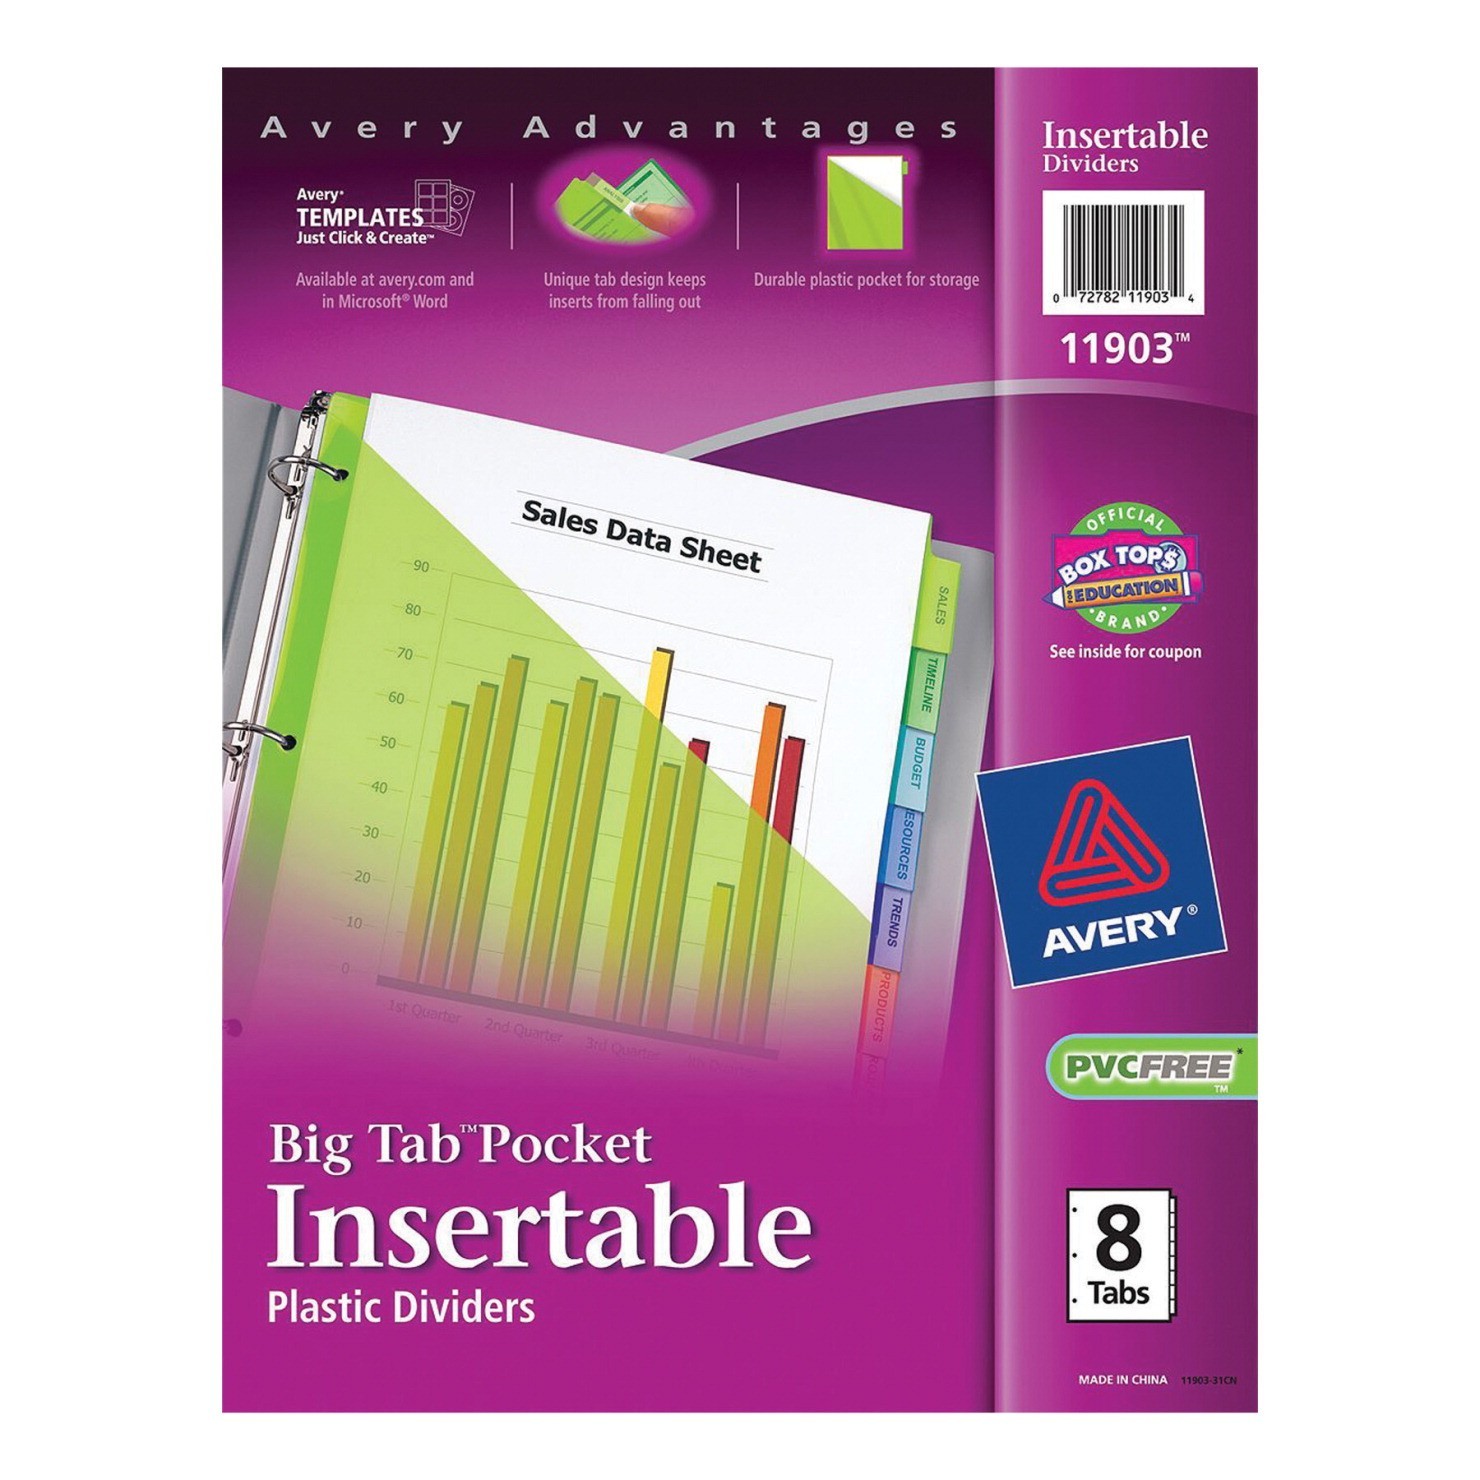 Avery Big Tab 8-Tab Plastic Insertable Dividers For Laser and Inkjet Printers, Multicolor, Pack of 8